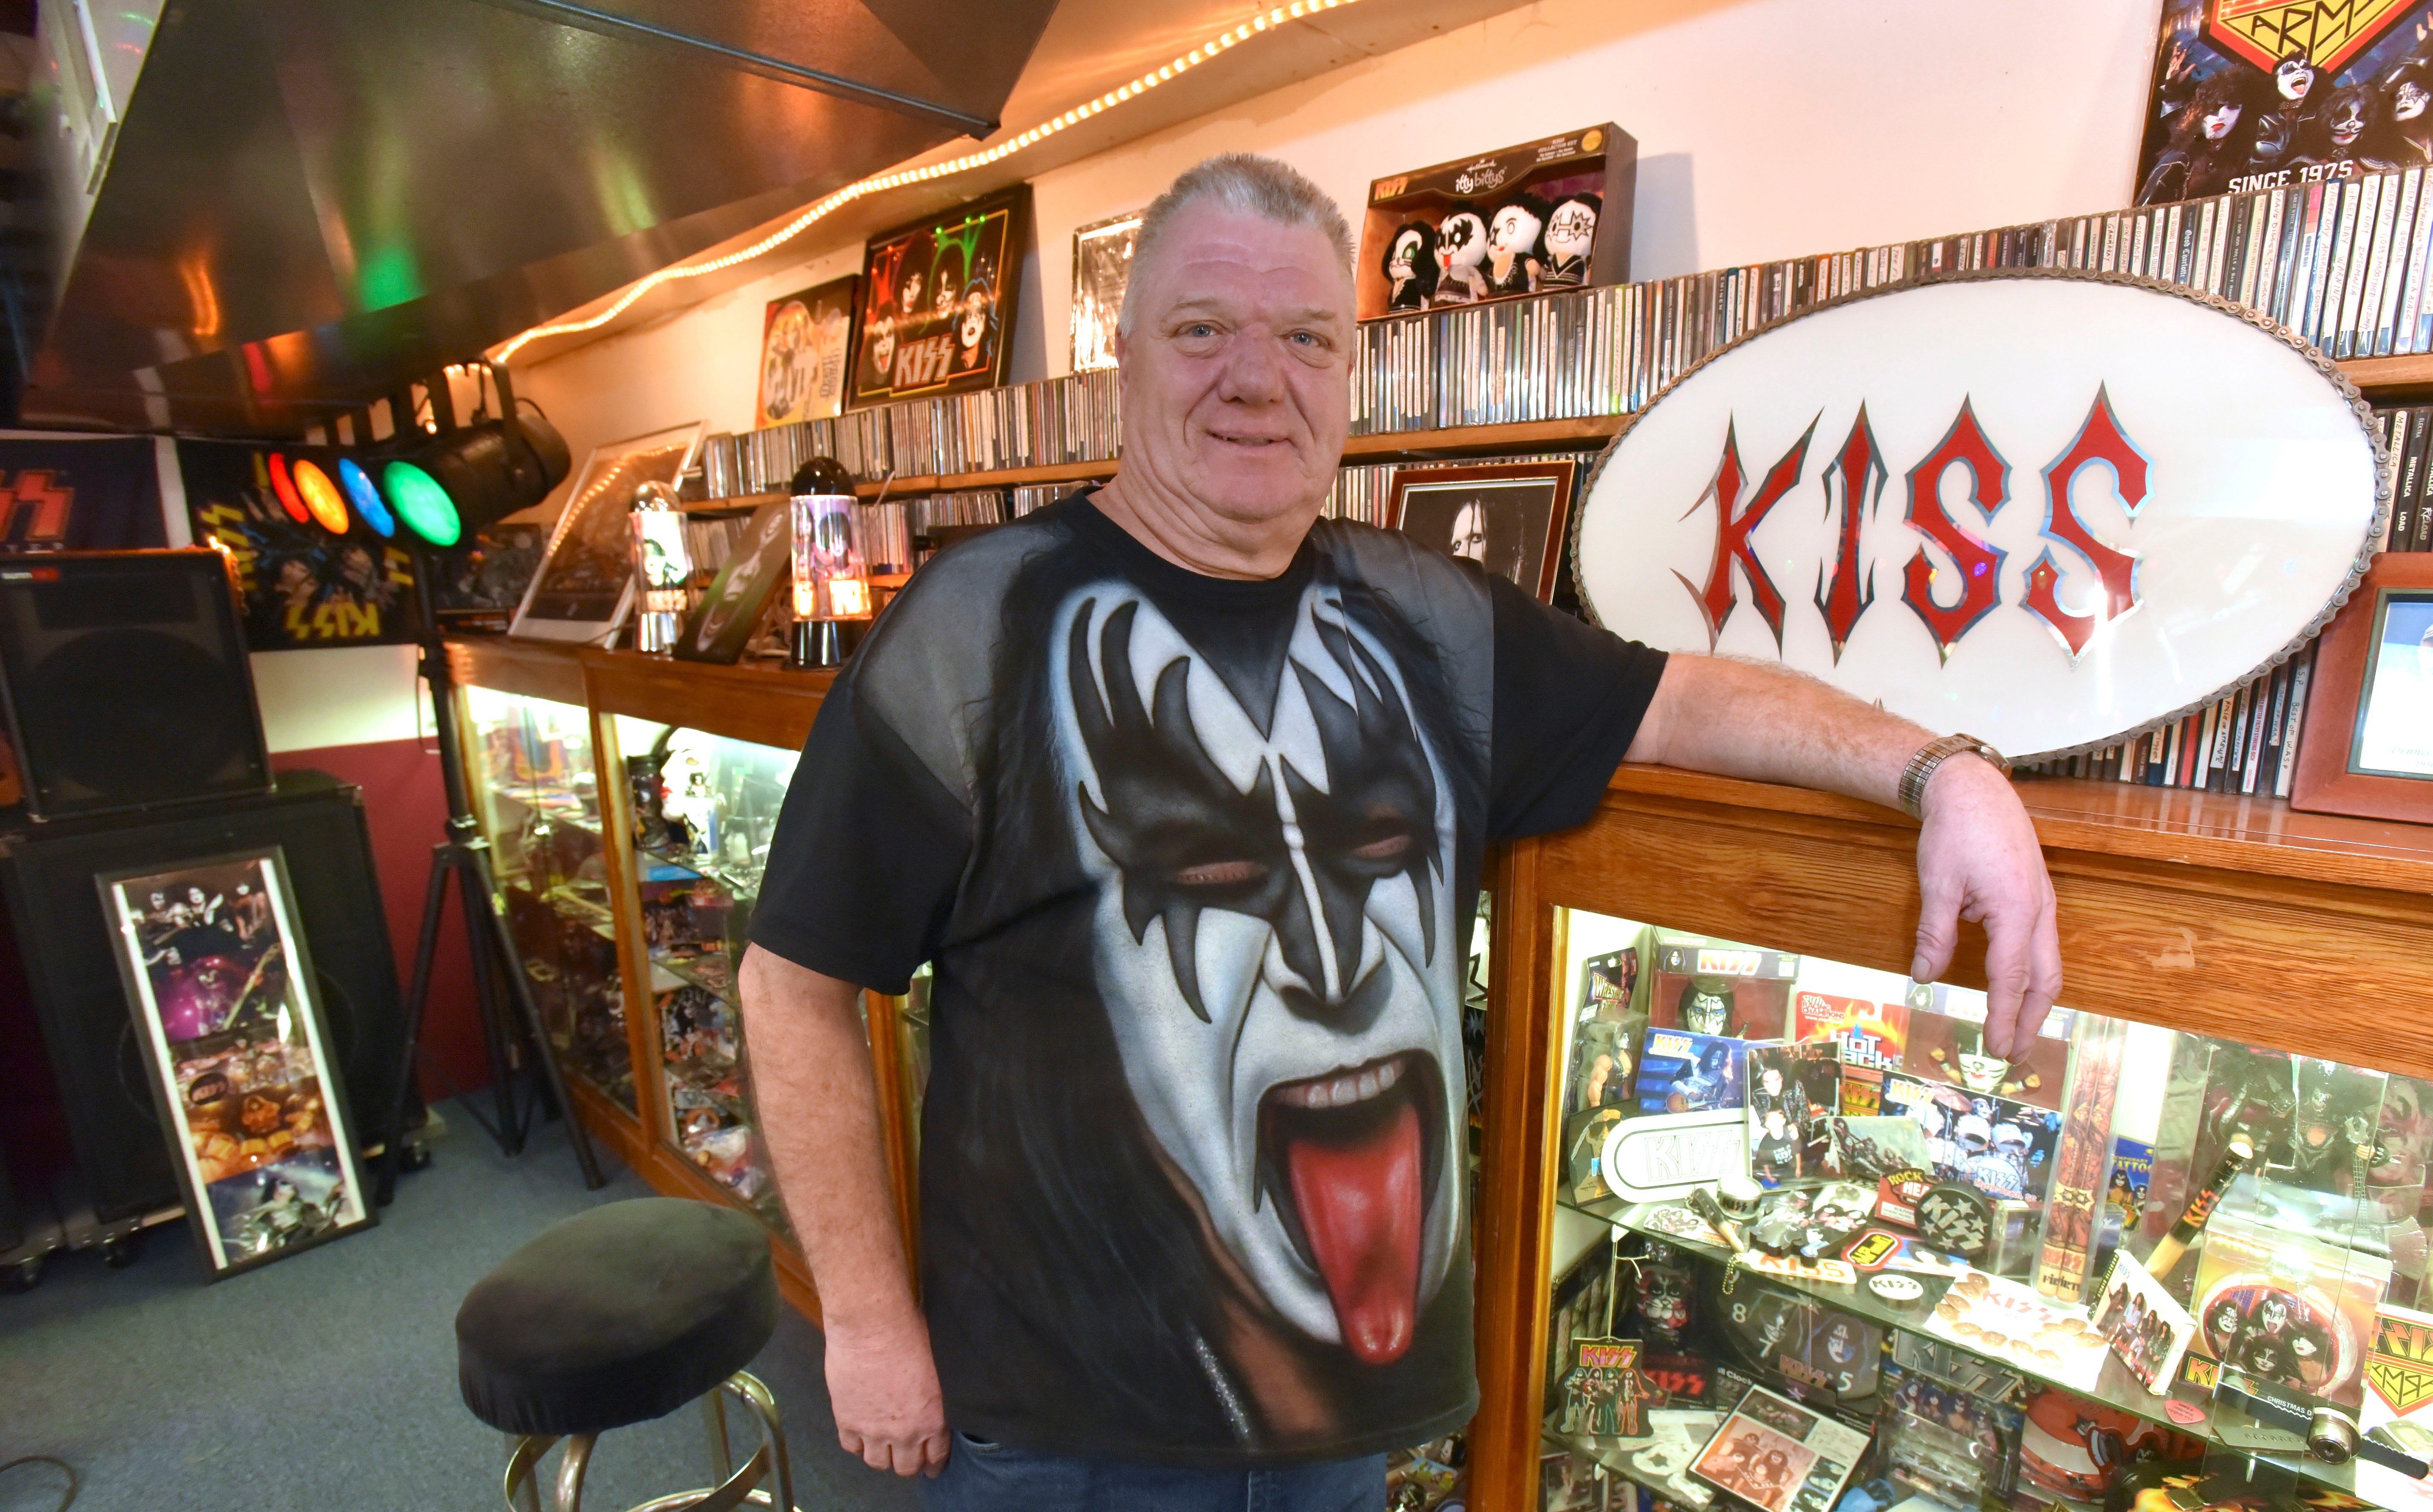 KISS memorabilia collector and fan Terry Pakulski, 58, poses among thousands of KISS items in 14 showcases in his Macomb County basement, Tuesday, March 12, 2019. He's been collecting memorabilia since he was 16. He's been on two KISS cruises and seen KISS 68 times since 1973, attending their concert last Saturday in Grand Rapids. He will attend his 69th KISS concert at Little Caesars Arena Wednesday night as they play their KISS: End of the Road World Tour.